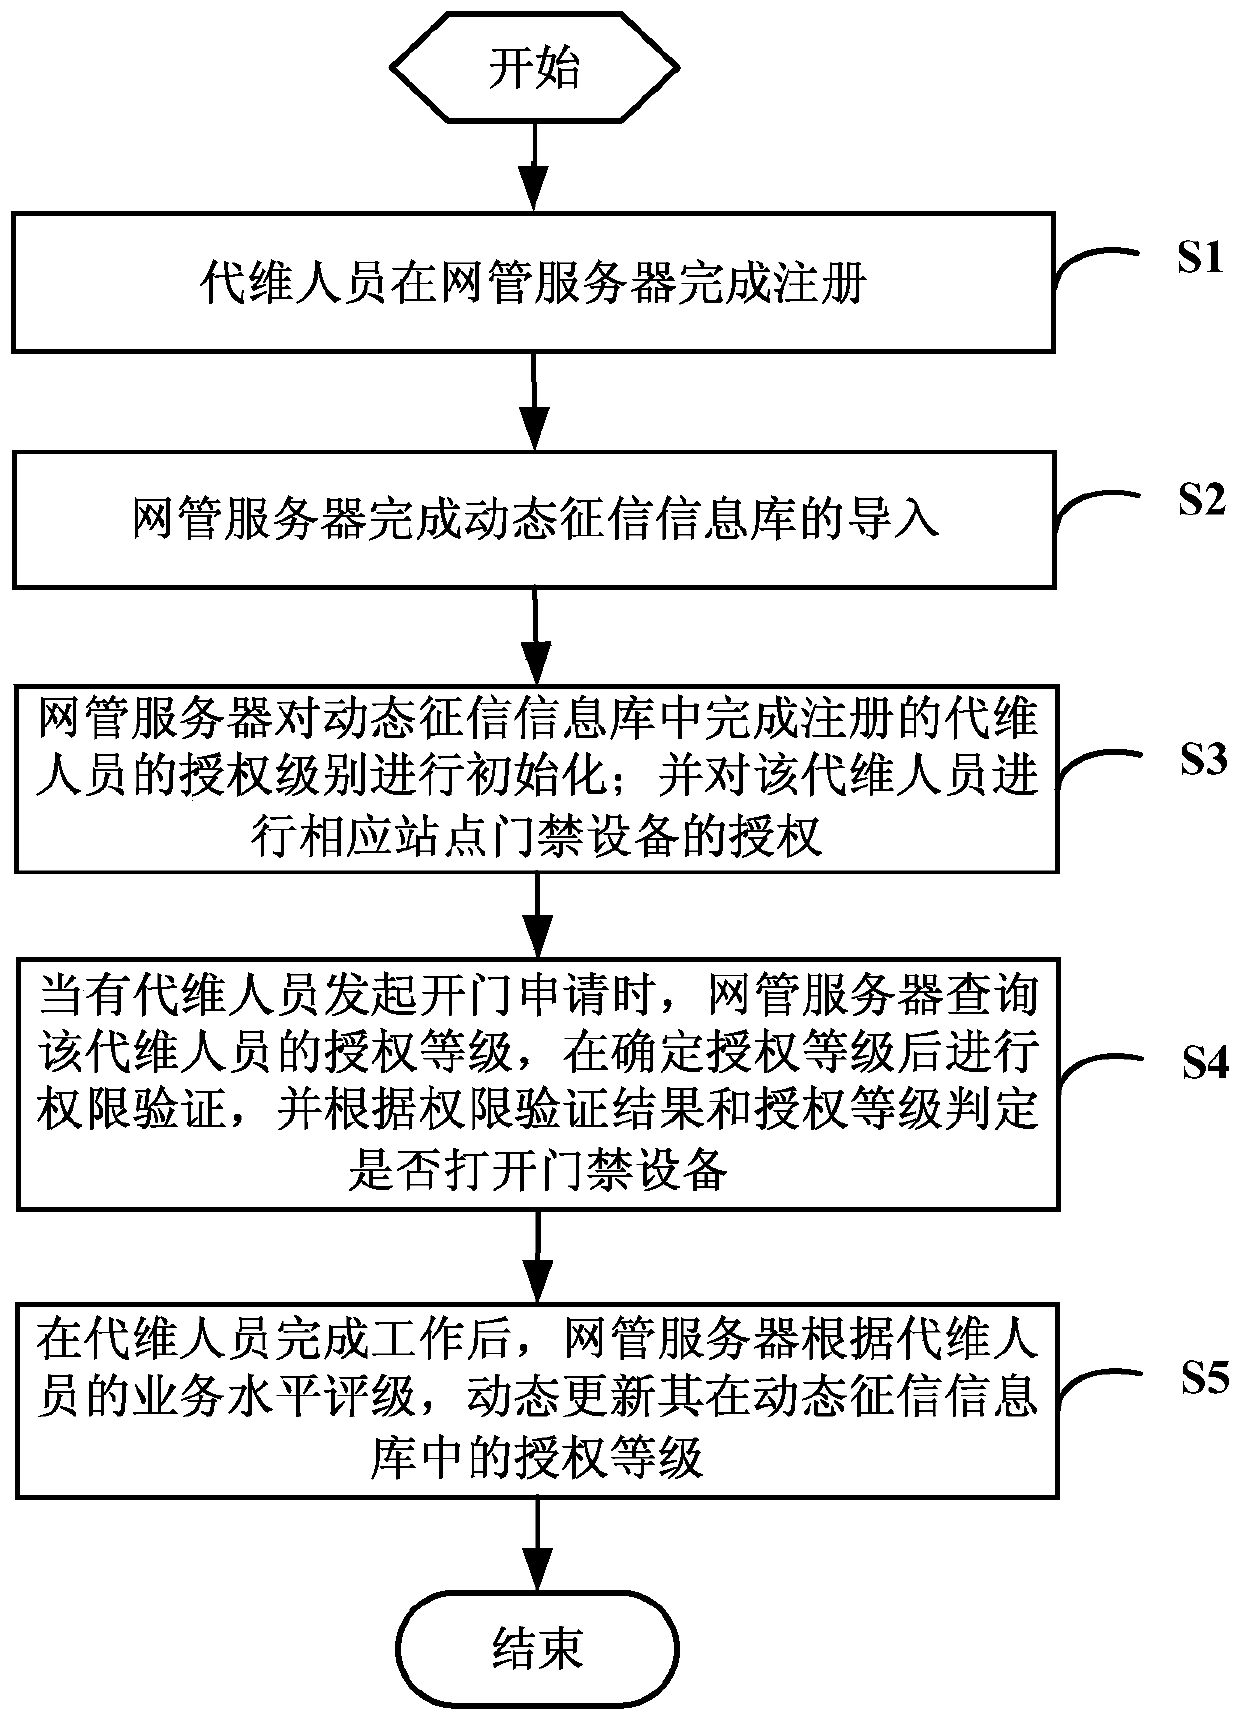 A method and system for access control authorization management based on credit information system